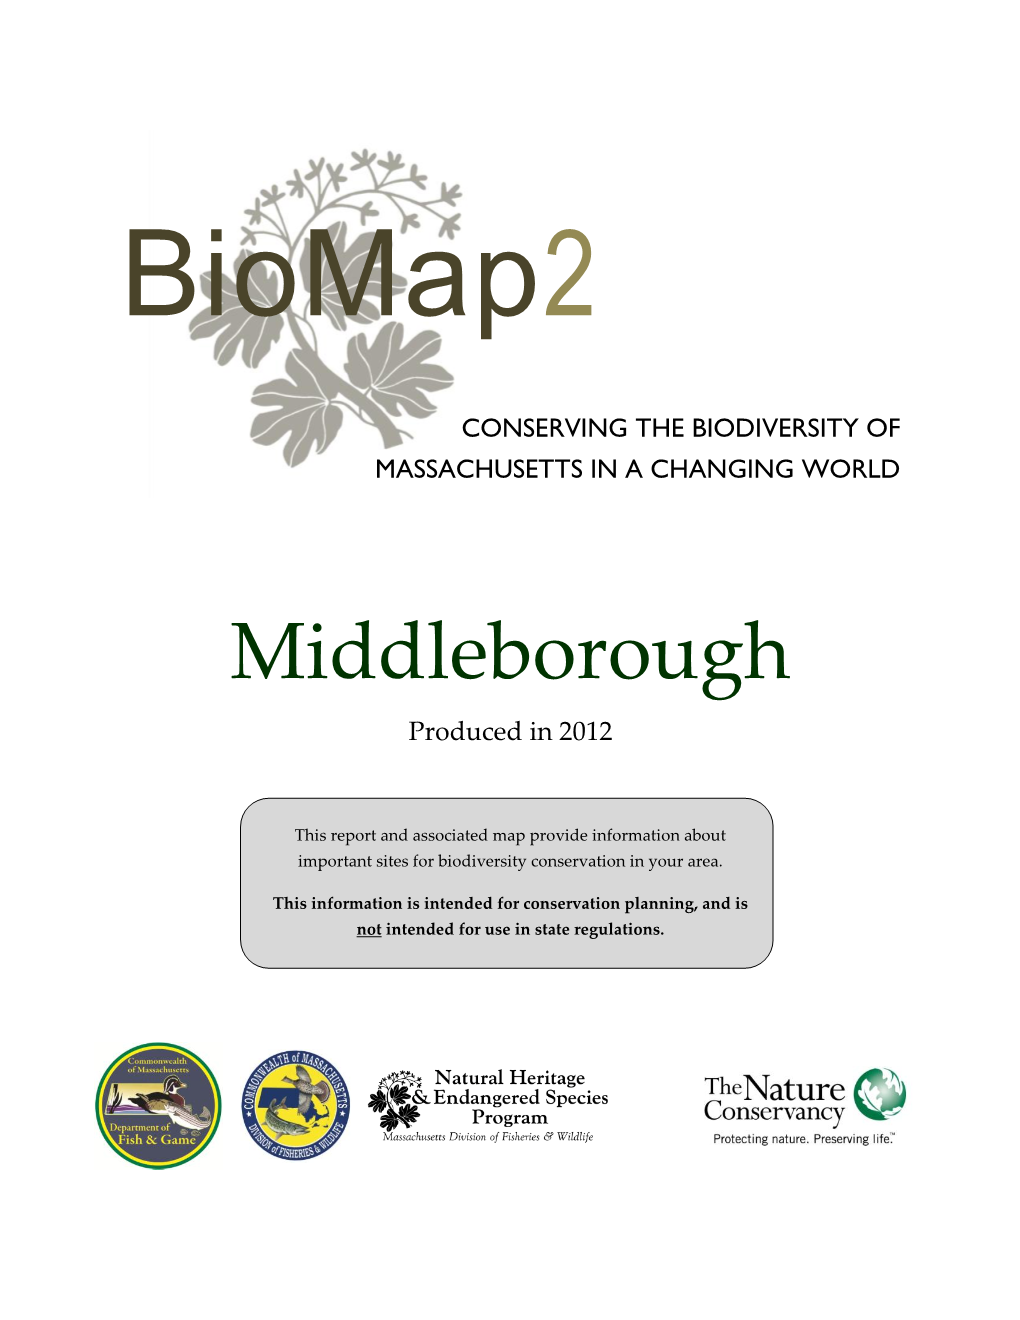 Middleborough Produced in 2012